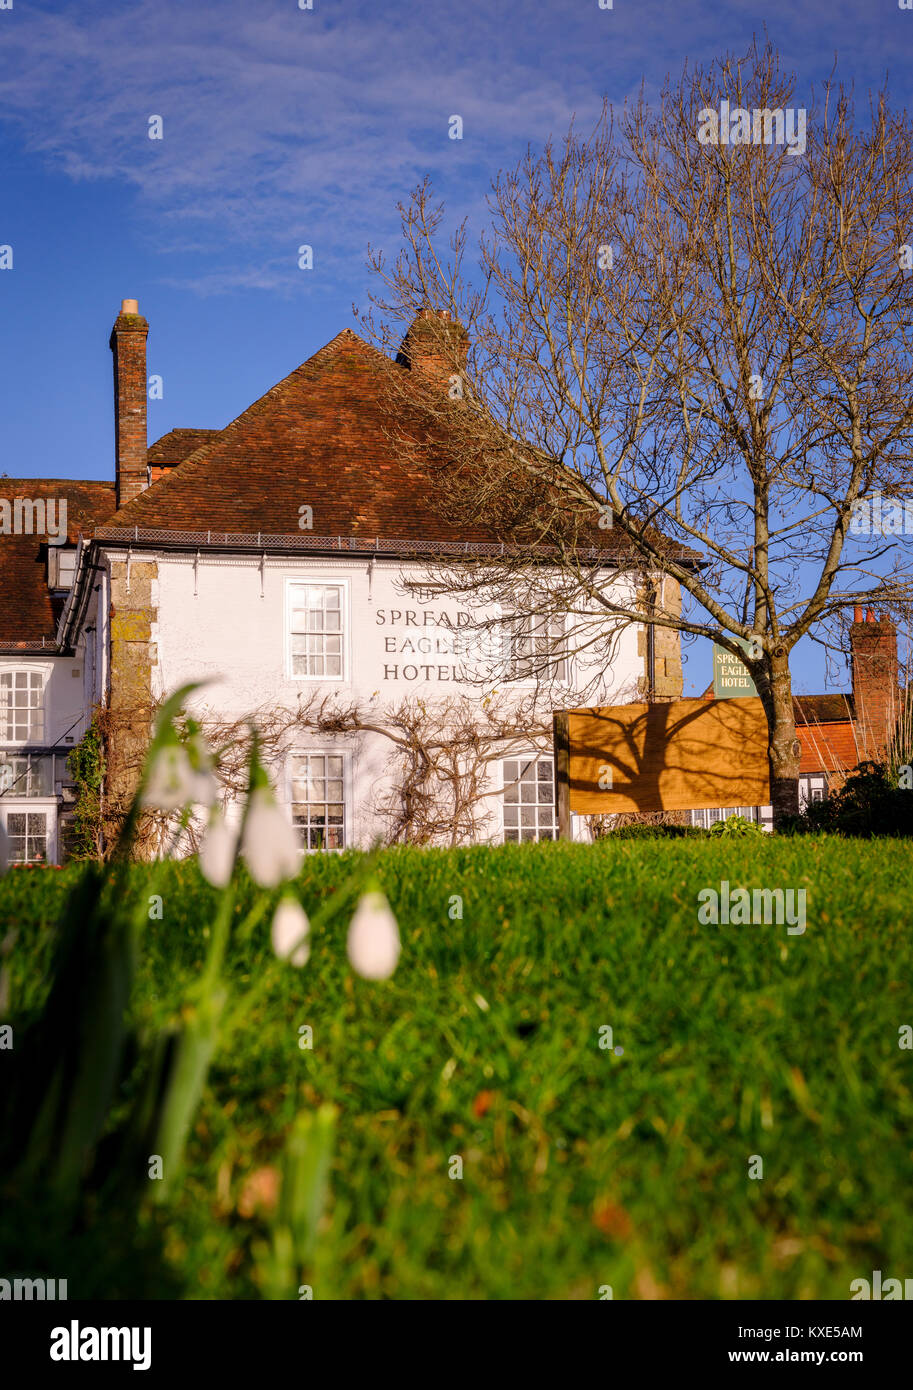 Lo Spread Eagle Hotel a Midhurst, West Sussex. Foto Stock